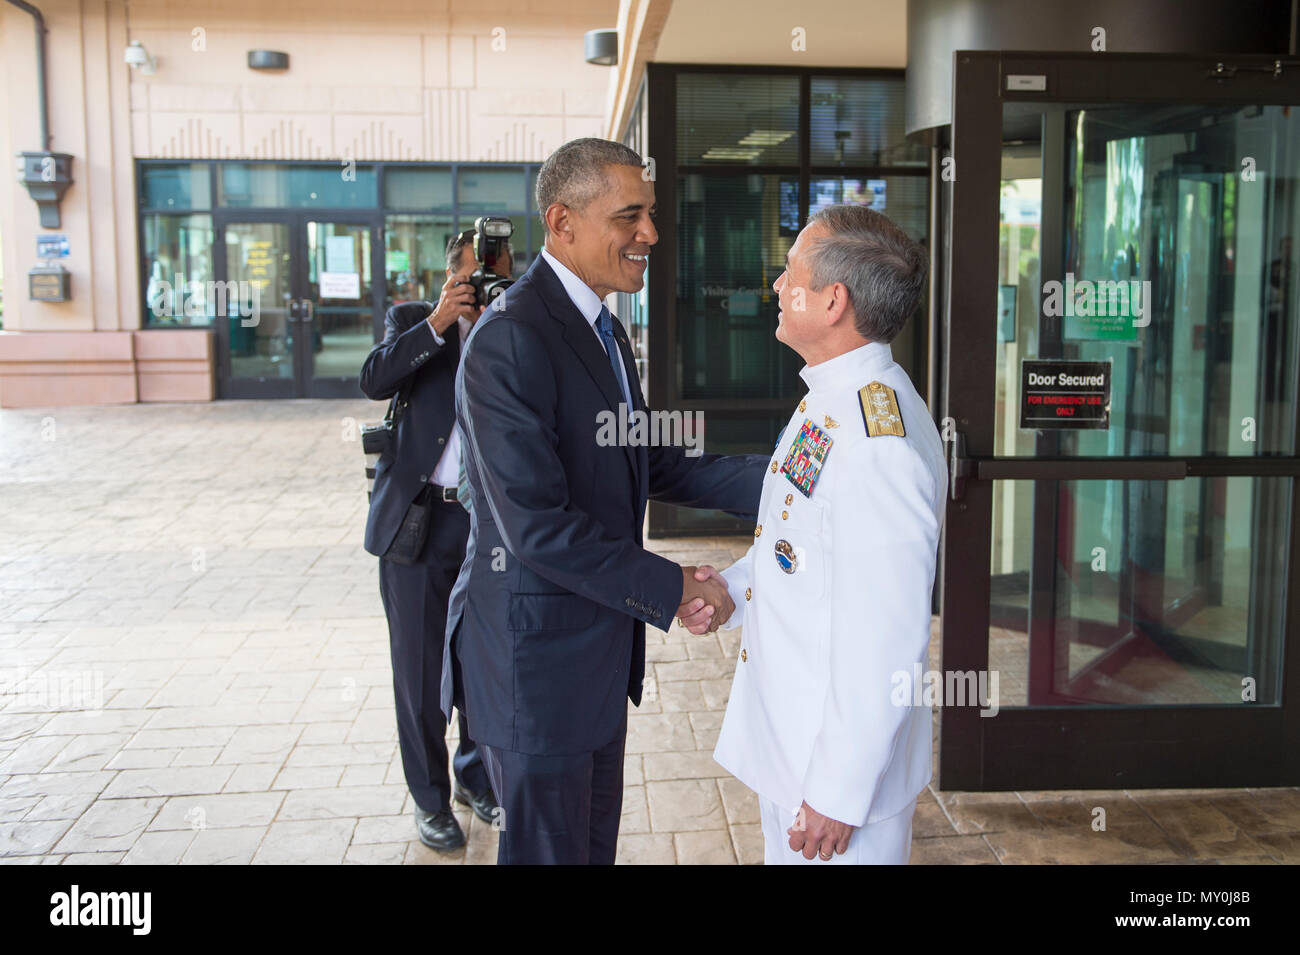 161227-N-DX698-013 CAMP H.M. SMITH, Hawaii (Dec. 27, 2016) Commander of U.S. Pacific Command (USPACOM) Adm. Harry Harris greets U.S. President Barack Obama at the USPACOM headquarters. President Obama will meet with Japanese Prime Minister Shinzo Abe at the USPACOM headquarters for a bilateral meeting. Obama welcomed Abe to Hawaii to further reconciliation between the U.S. and Japan and the alliance between their nations. (U.S. Navy photo by Mass Communication Specialist 1st Class Jay M. Chu/Released) Stock Photo